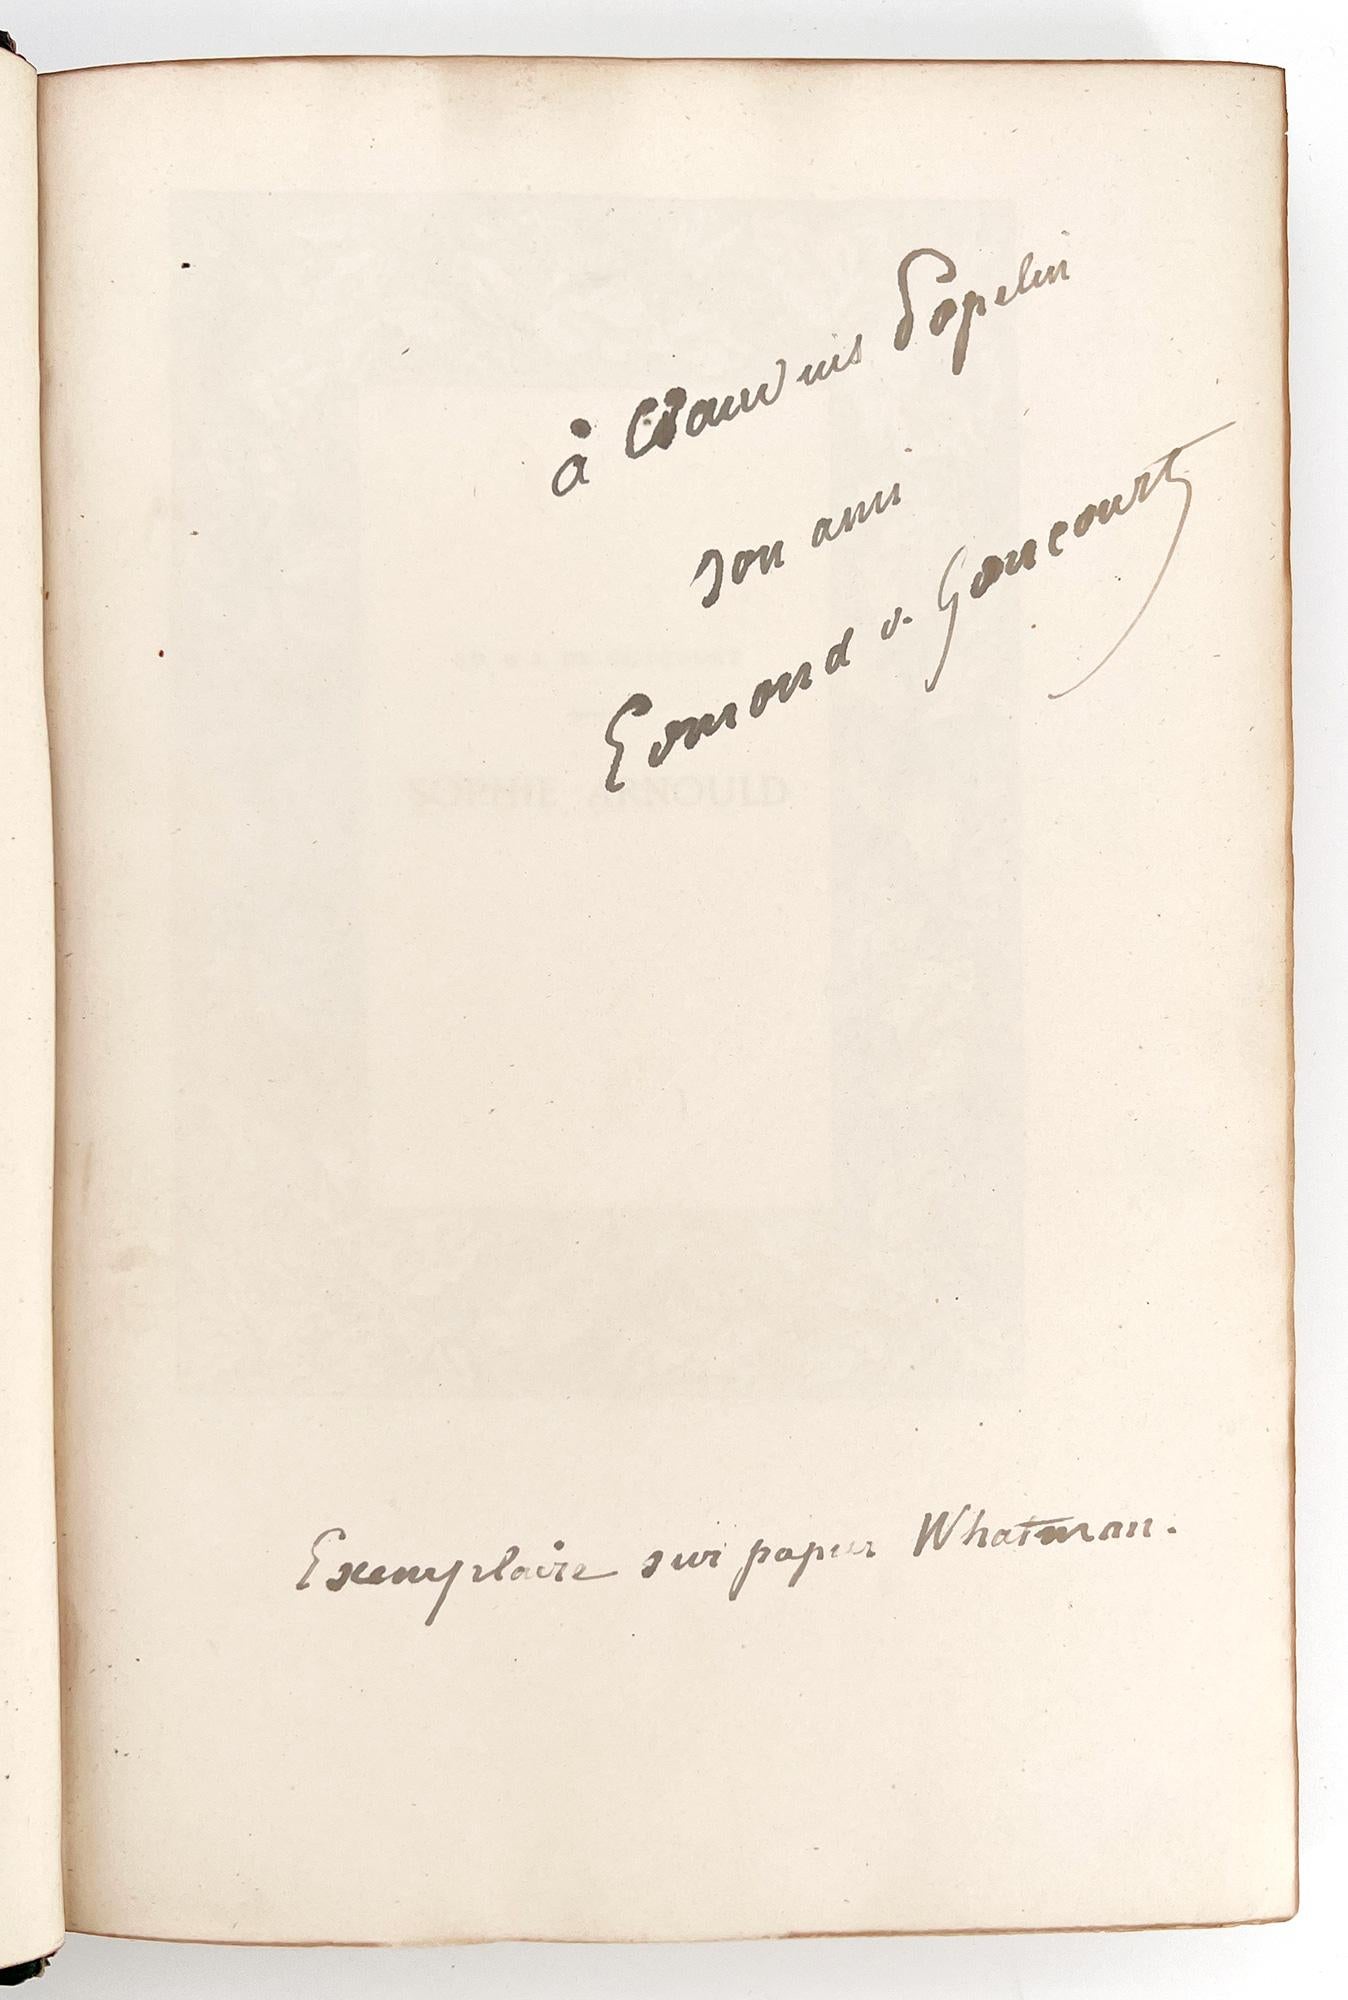 SIGNED, Second edition on LARGE PAPER
One of the first personal biographies (biographies intimes) written by the Goncourt brothers and composed in 1857.  This special edition with elaborate floral frames and a facsimile letter was published in small